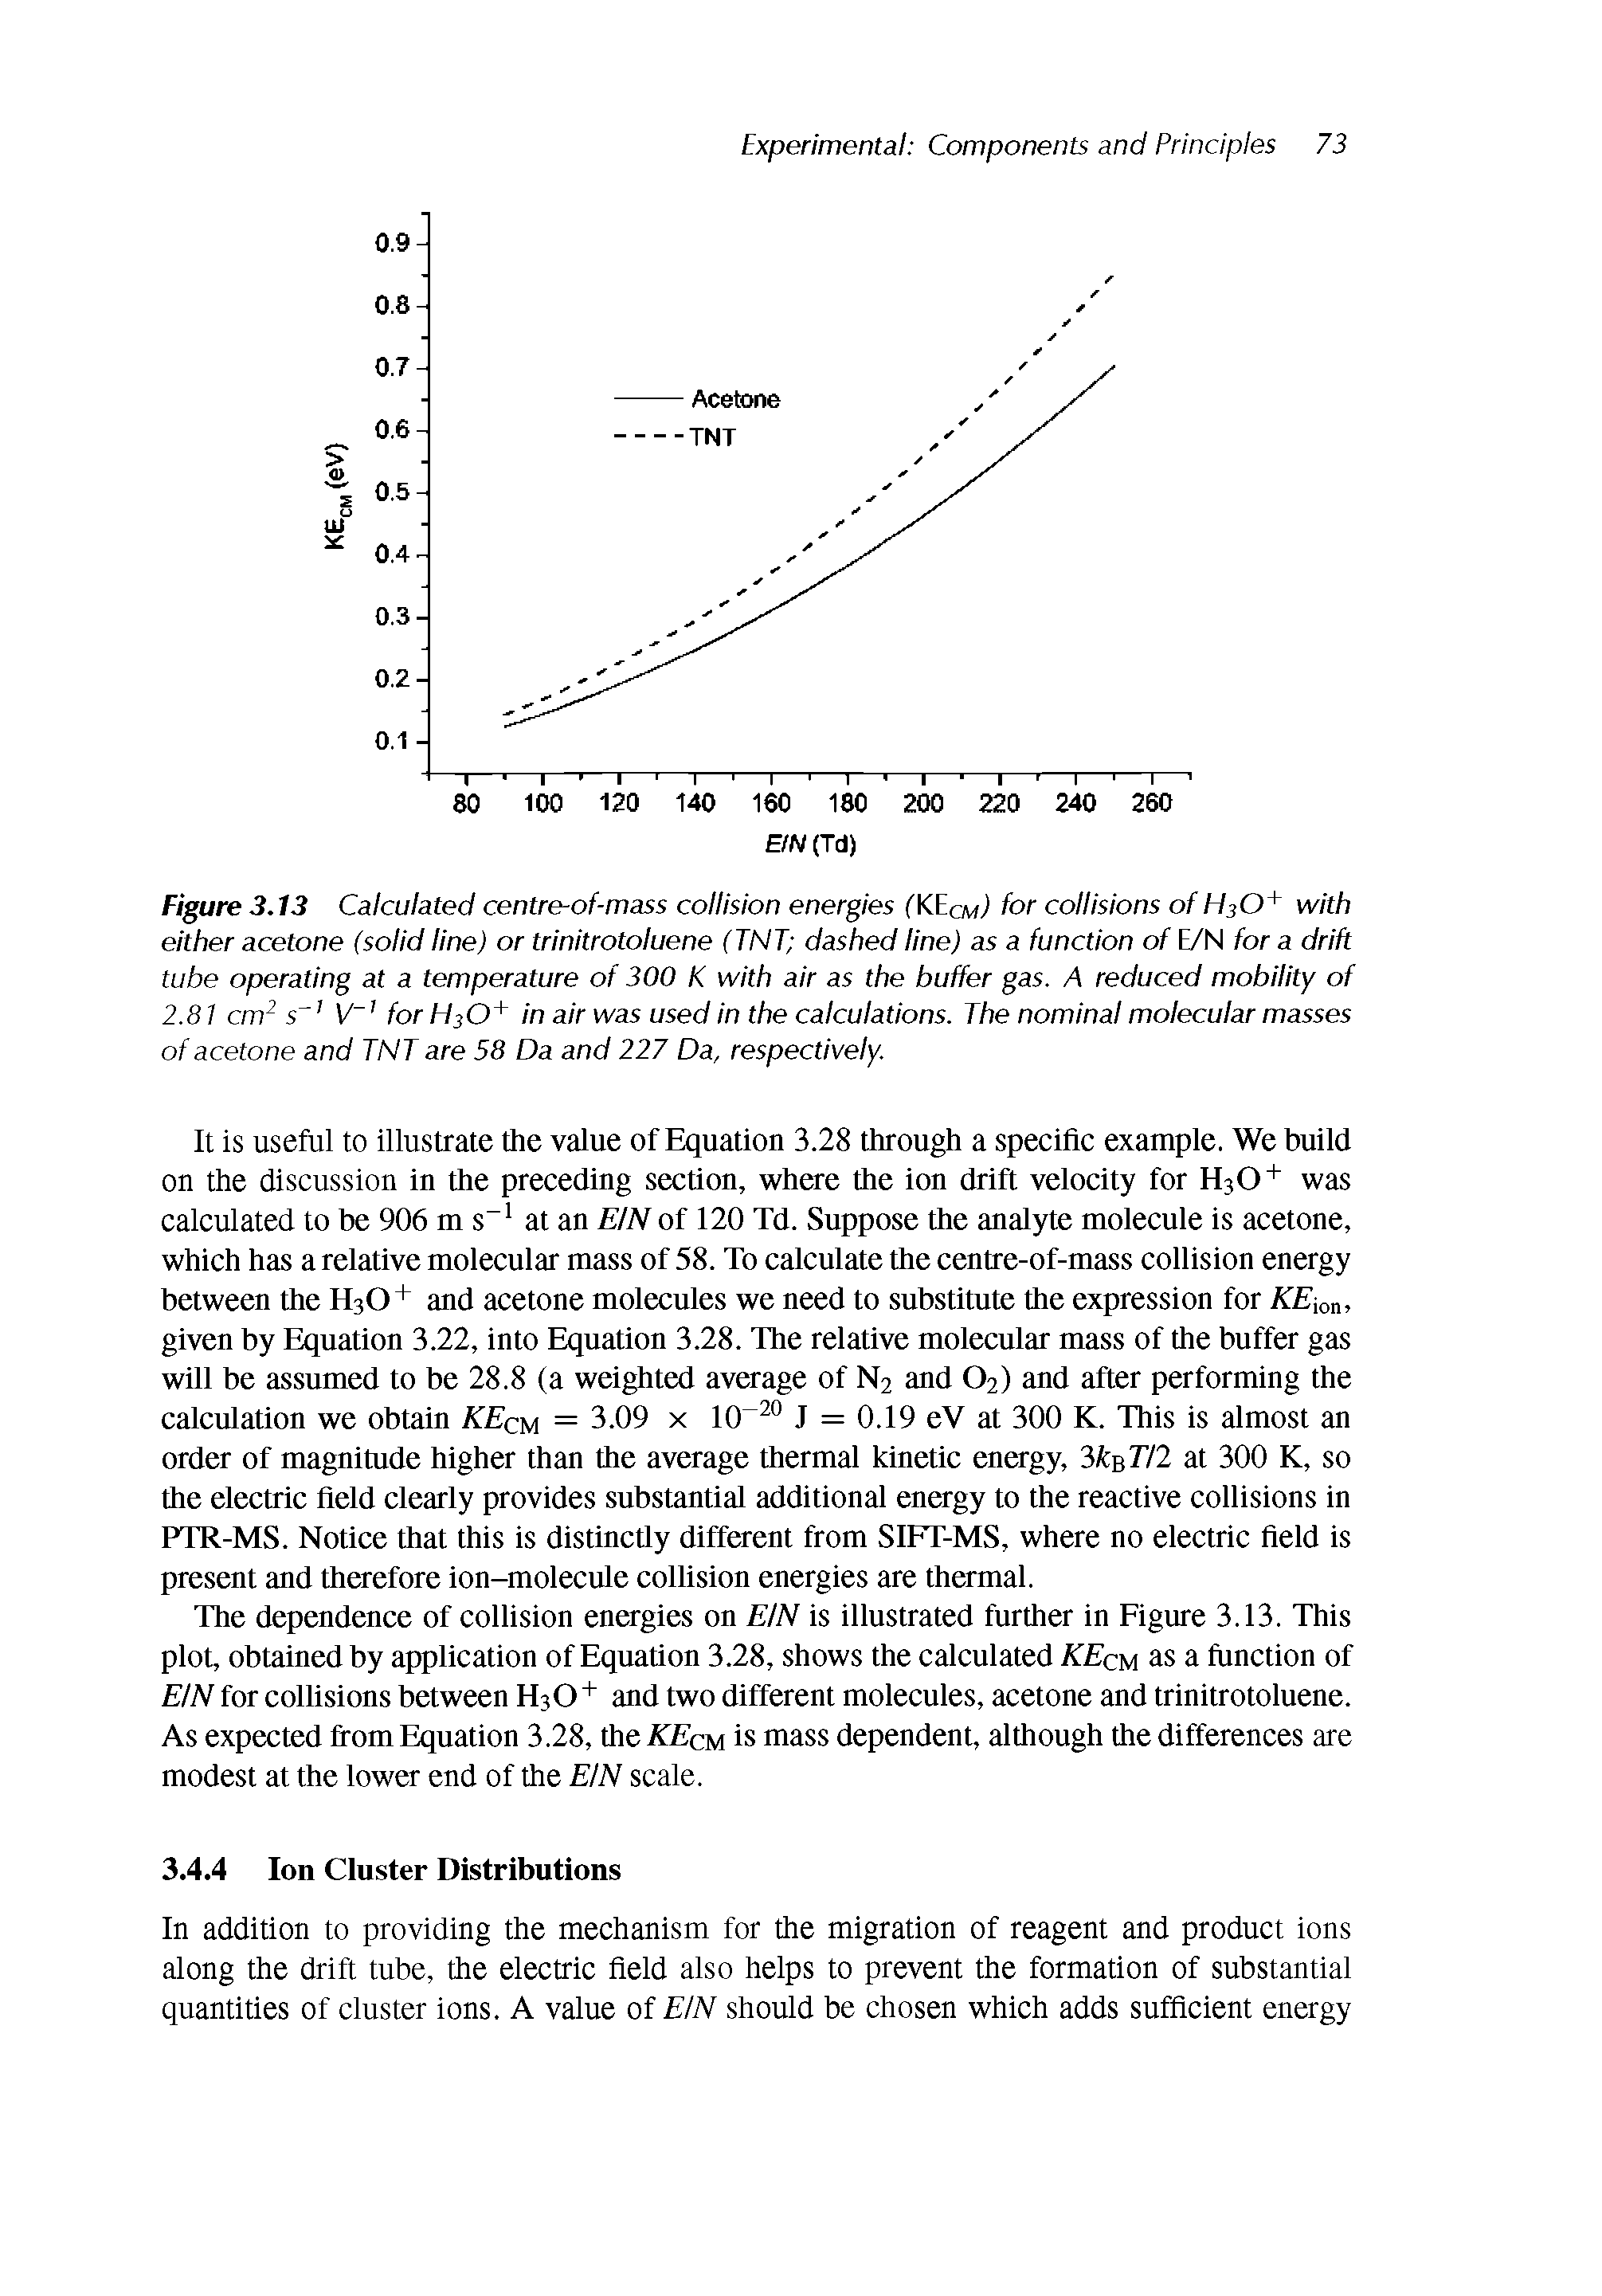 Figure 3.13 Calculated centre-of-mass collision energies (KEcm) for collisions of H3O+ with either acetone (solid line) or trinitrotoluene (TNT dashed line) as a function of E/N for a drift tube operating at a temperature of 300 K with air as the buffer gas. A reduced mobility of 2.81 cm s V forHsO in air was used in the calculations. The nominal molecular masses of acetone and TNT are 58 Da and 227 Da, respectively.